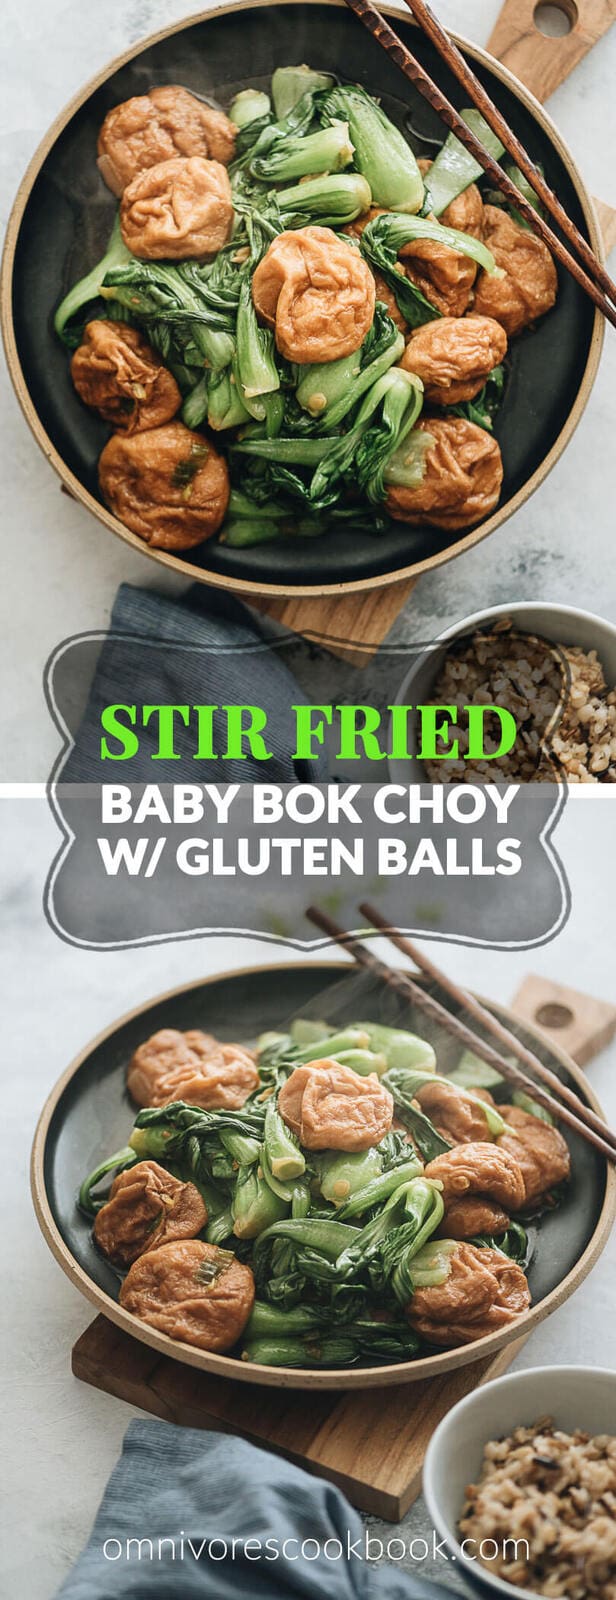 Stir Fried Baby Bok Choy with Gluten Balls - Very easy to make and bursting with flavor, it’s a great choice if you’re trying to find an interesting way to spice up your vegetarian meal and add a dose of plant-based protein. #chinese #recipes #vegan #stirfry